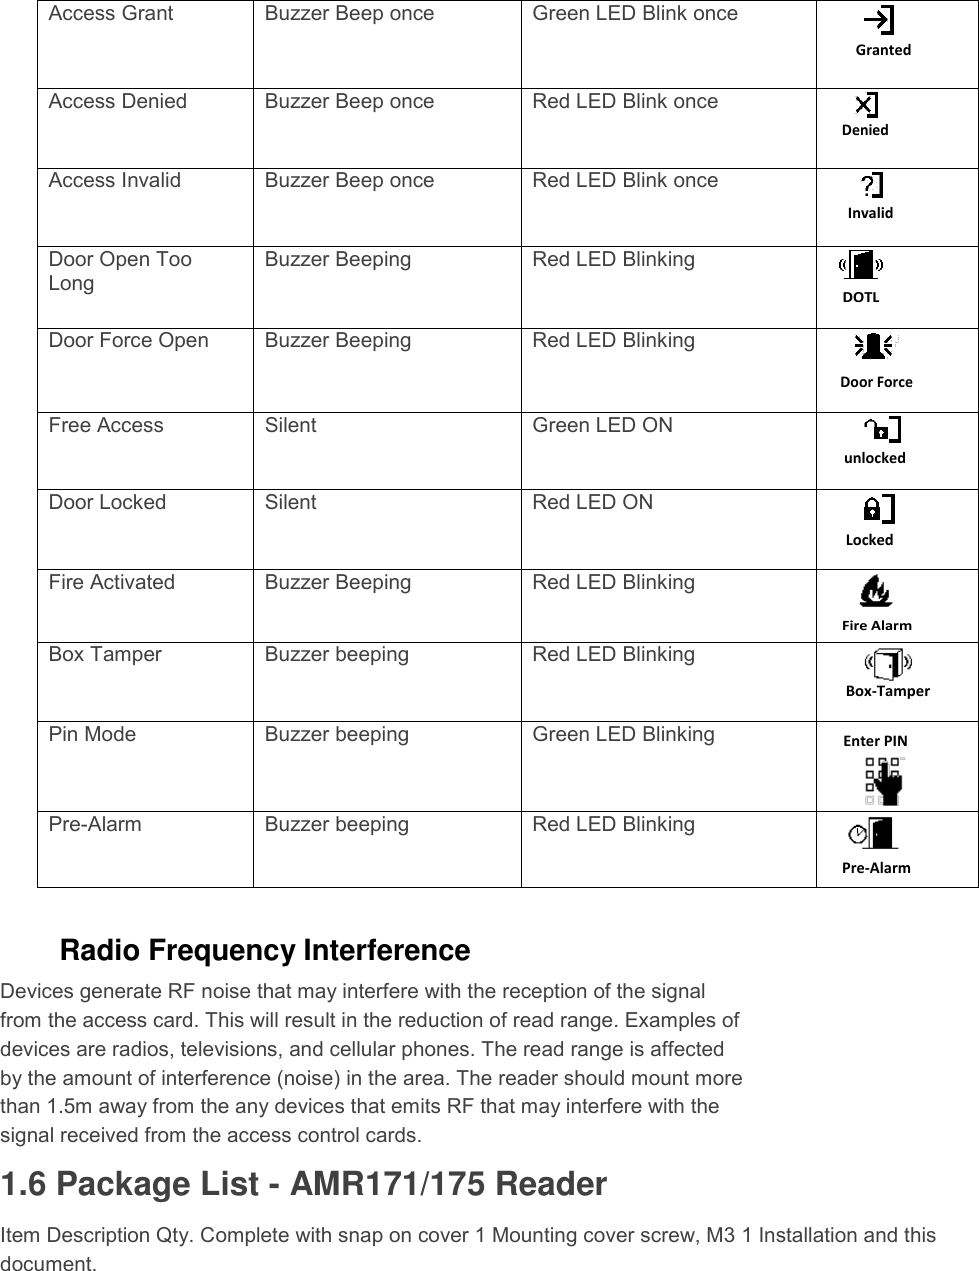   Radio Frequency Interference  Devices generate RF noise that may interfere with the reception of the signal from the access card. This will result in the reduction of read range. Examples of devices are radios, televisions, and cellular phones. The read range is affected by the amount of interference (noise) in the area. The reader should mount more than 1.5m away from the any devices that emits RF that may interfere with the signal received from the access control cards. 1.6 Package List - AMR171/175 Reader Item Description Qty. Complete with snap on cover 1 Mounting cover screw, M3 1 Installation and this document.    Access Grant Buzzer Beep once Green LED Blink once Granted Access Denied Buzzer Beep once Red LED Blink once Denied Access Invalid Buzzer Beep once Red LED Blink once Invalid Door Open Too Long Buzzer Beeping Red LED Blinking DOTL Door Force Open Buzzer Beeping Red LED Blinking Door Force Free Access Silent Green LED ON unlocked Door Locked Silent Red LED ON Locked Fire Activated Buzzer Beeping Red LED Blinking Fire Alarm Box Tamper Buzzer beeping Red LED Blinking Box-Tamper Pin Mode Buzzer beeping Green LED Blinking Enter PIN Pre-Alarm Buzzer beeping Red LED Blinking Pre-Alarm   